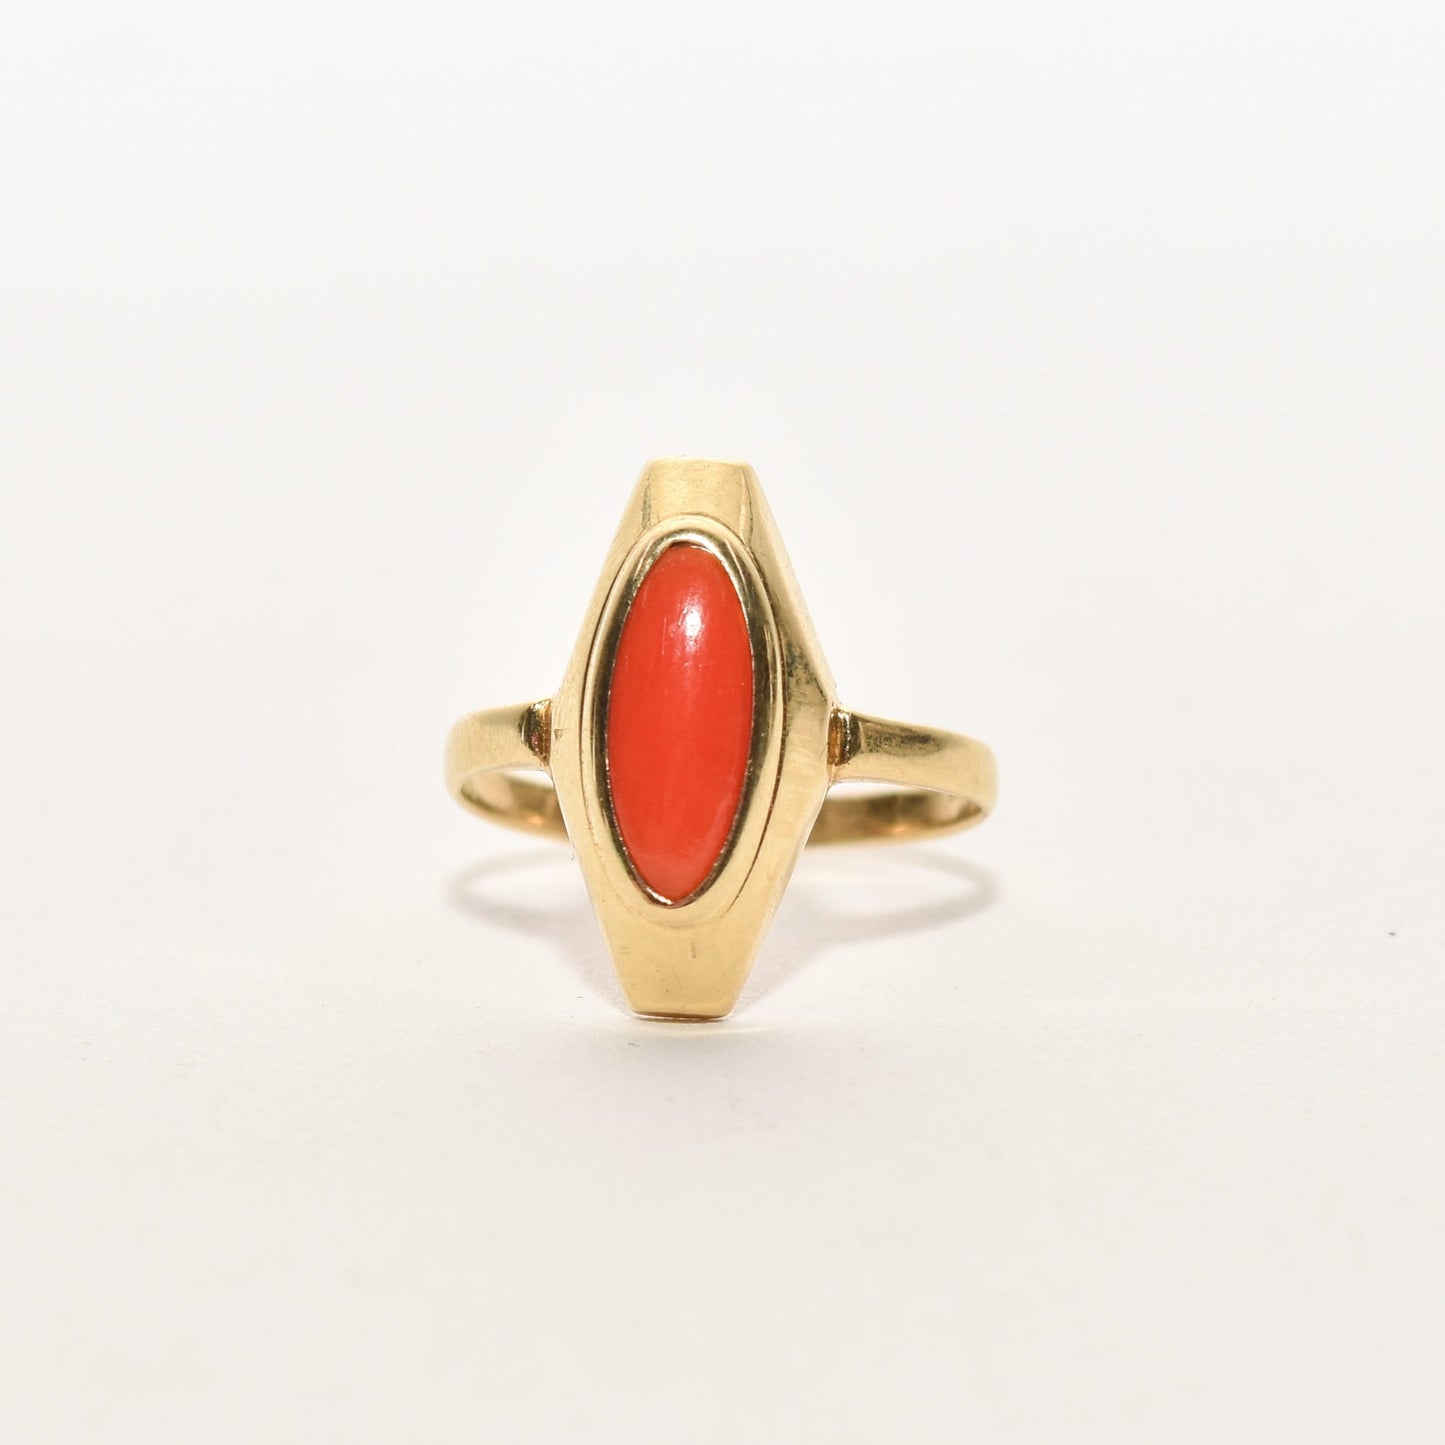 Estate 18K yellow gold ring featuring a marquise-cut red coral, size 5.25 US, displayed on a white background.